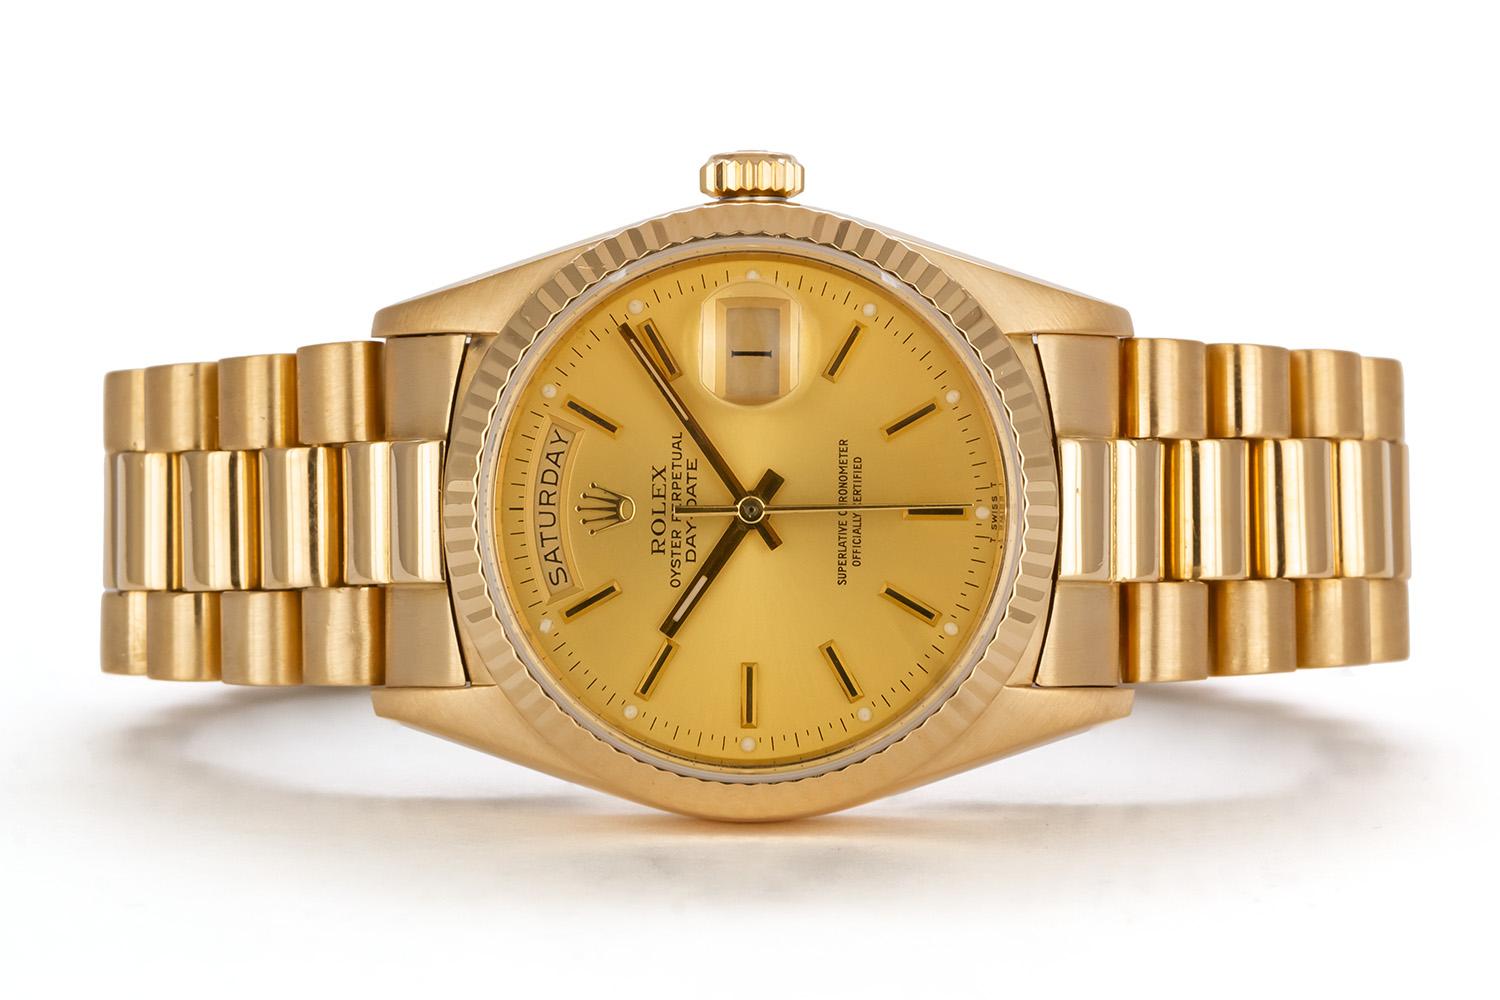 We are pleased to offer this 1984 Rolex 18k Yellow Gold Day-Date 36mm President 18048 Single-Quick with the original box and papers. This classic mens Rolex Day-Date dress watch features a 36mm solid 18k yellow gold case with a champagne stick dial